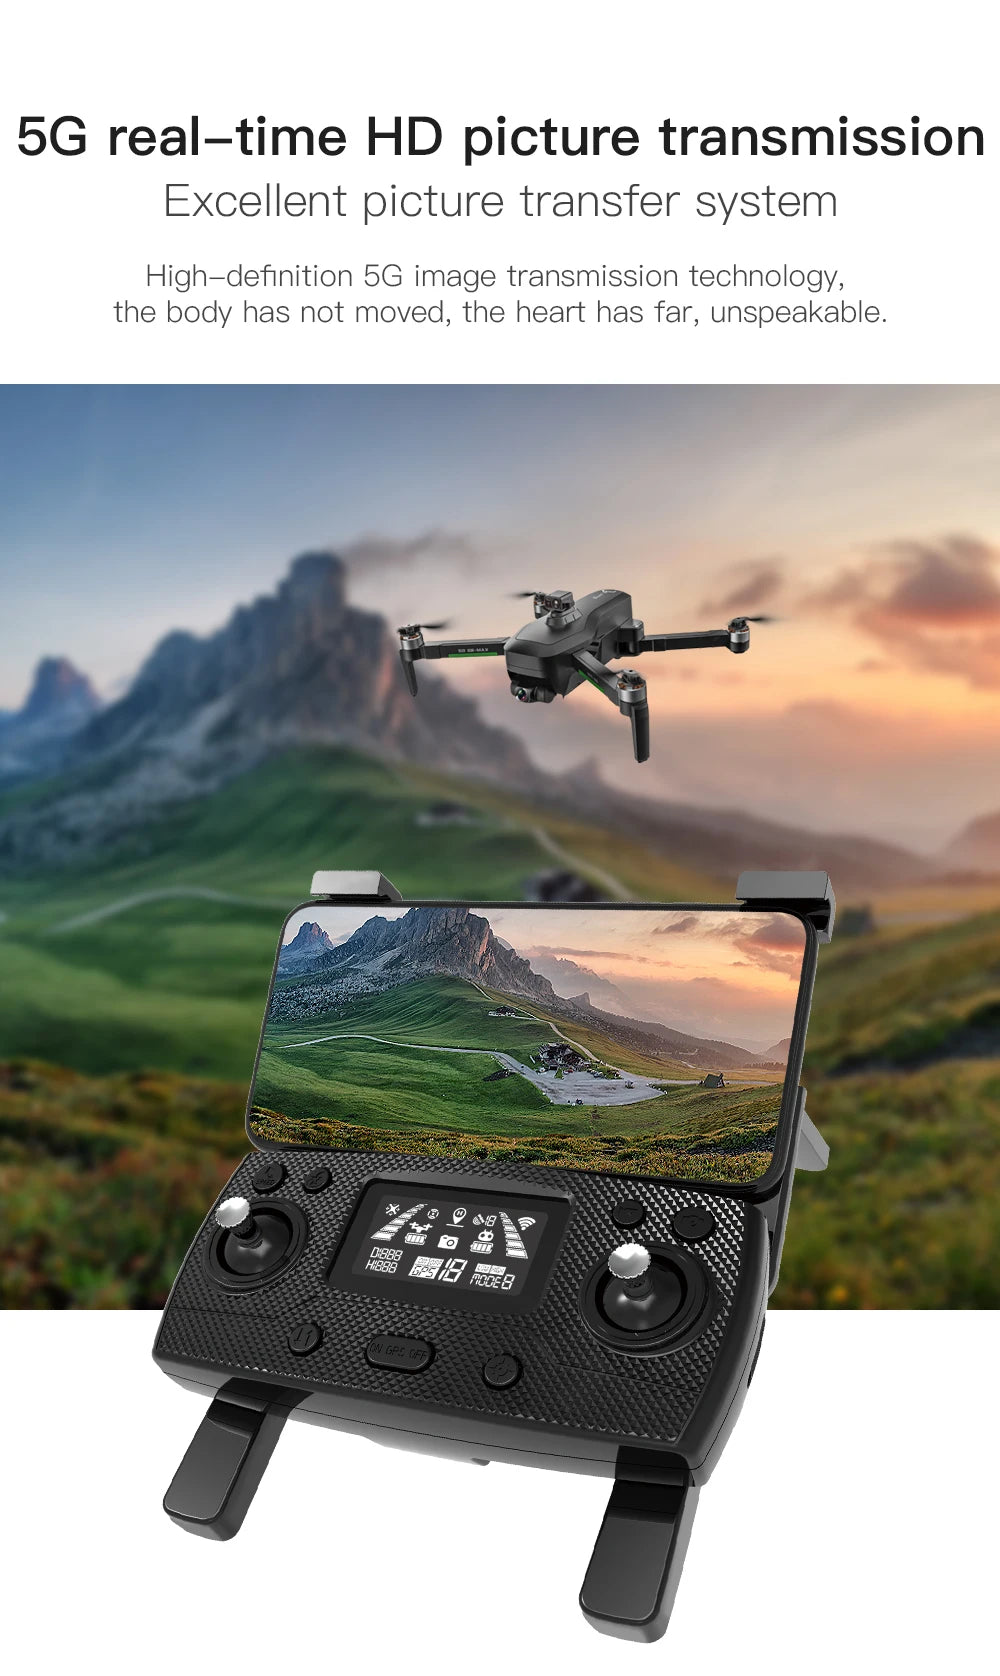 HGIYI SG906 MAX2  Drone, 5G real-time picture transmission Excellent picture transfer system . the body has not moved,